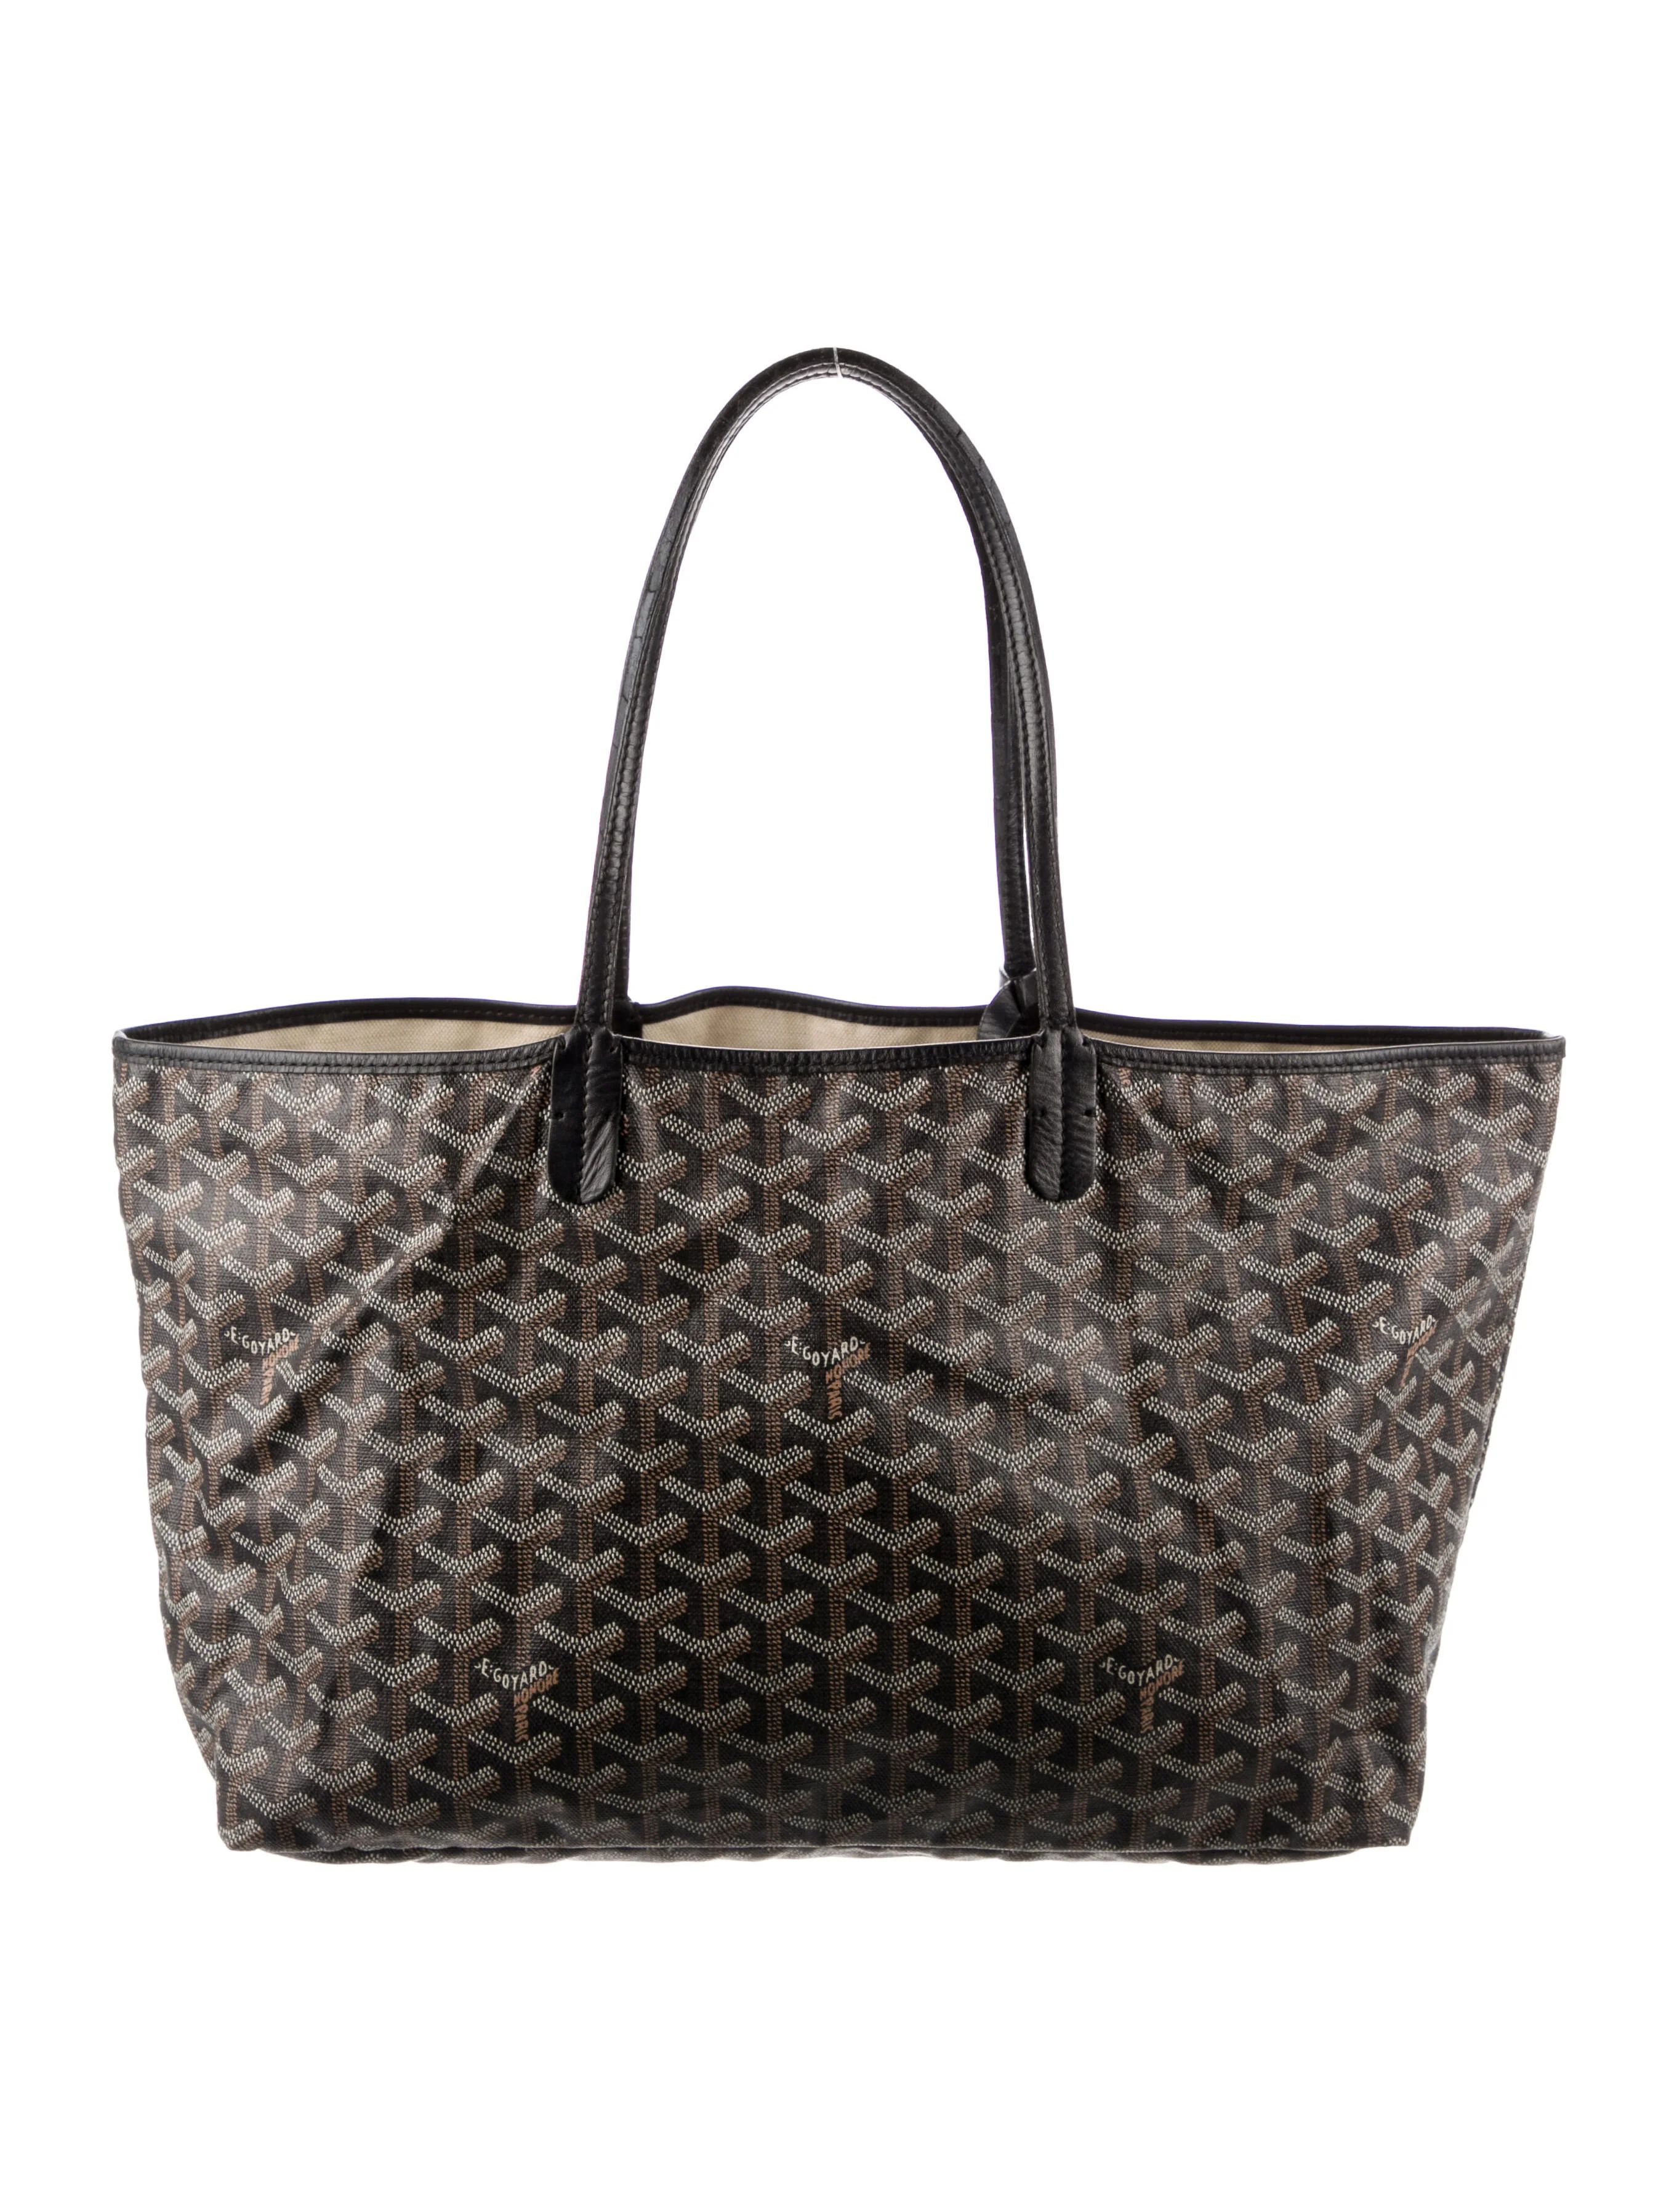 St. Louis PM Tote | The RealReal